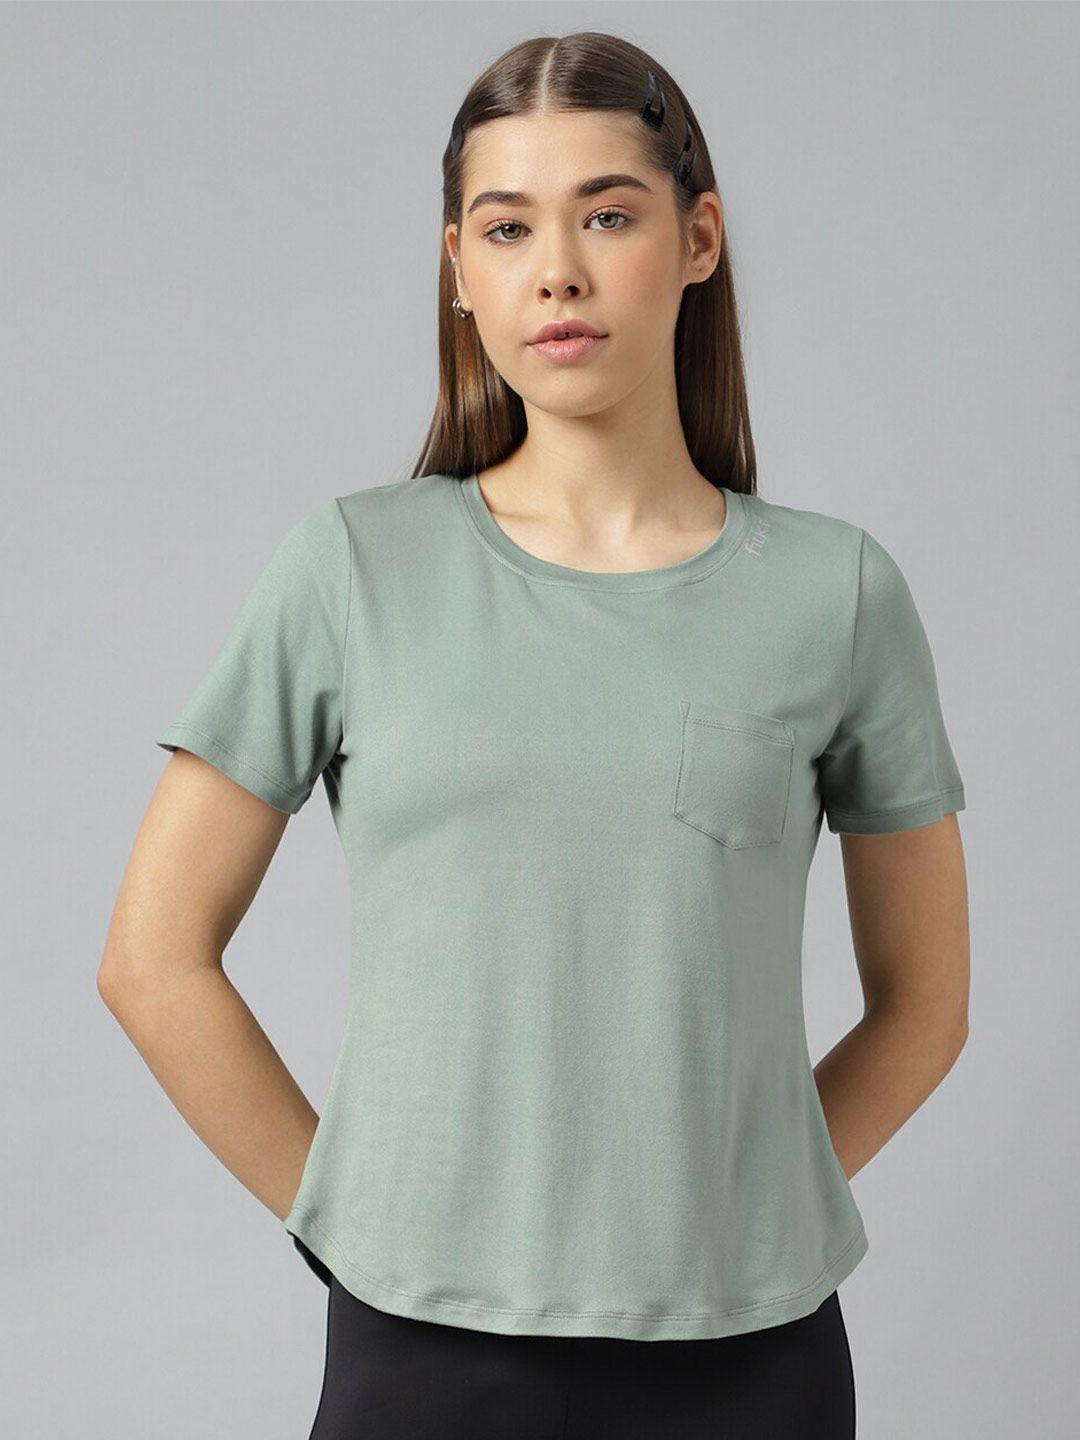 fitkin anti odour regular sleeves pocket relaxed fit sports t-shirt